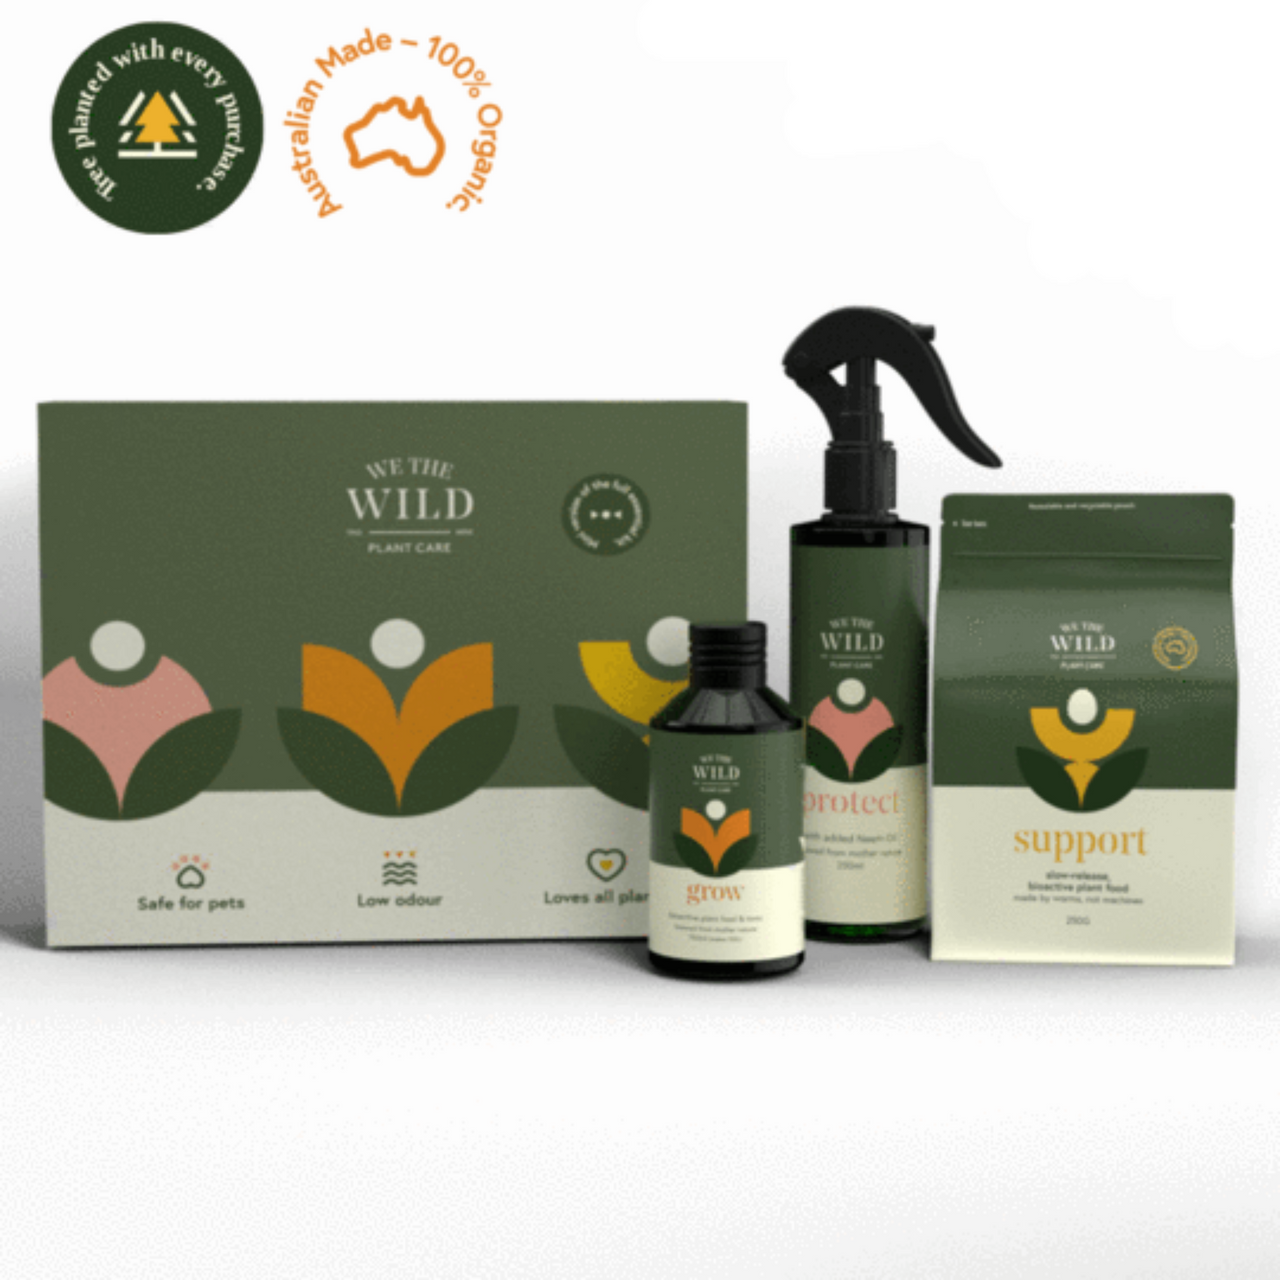 WE THE WILD Essential Plant Care Kit